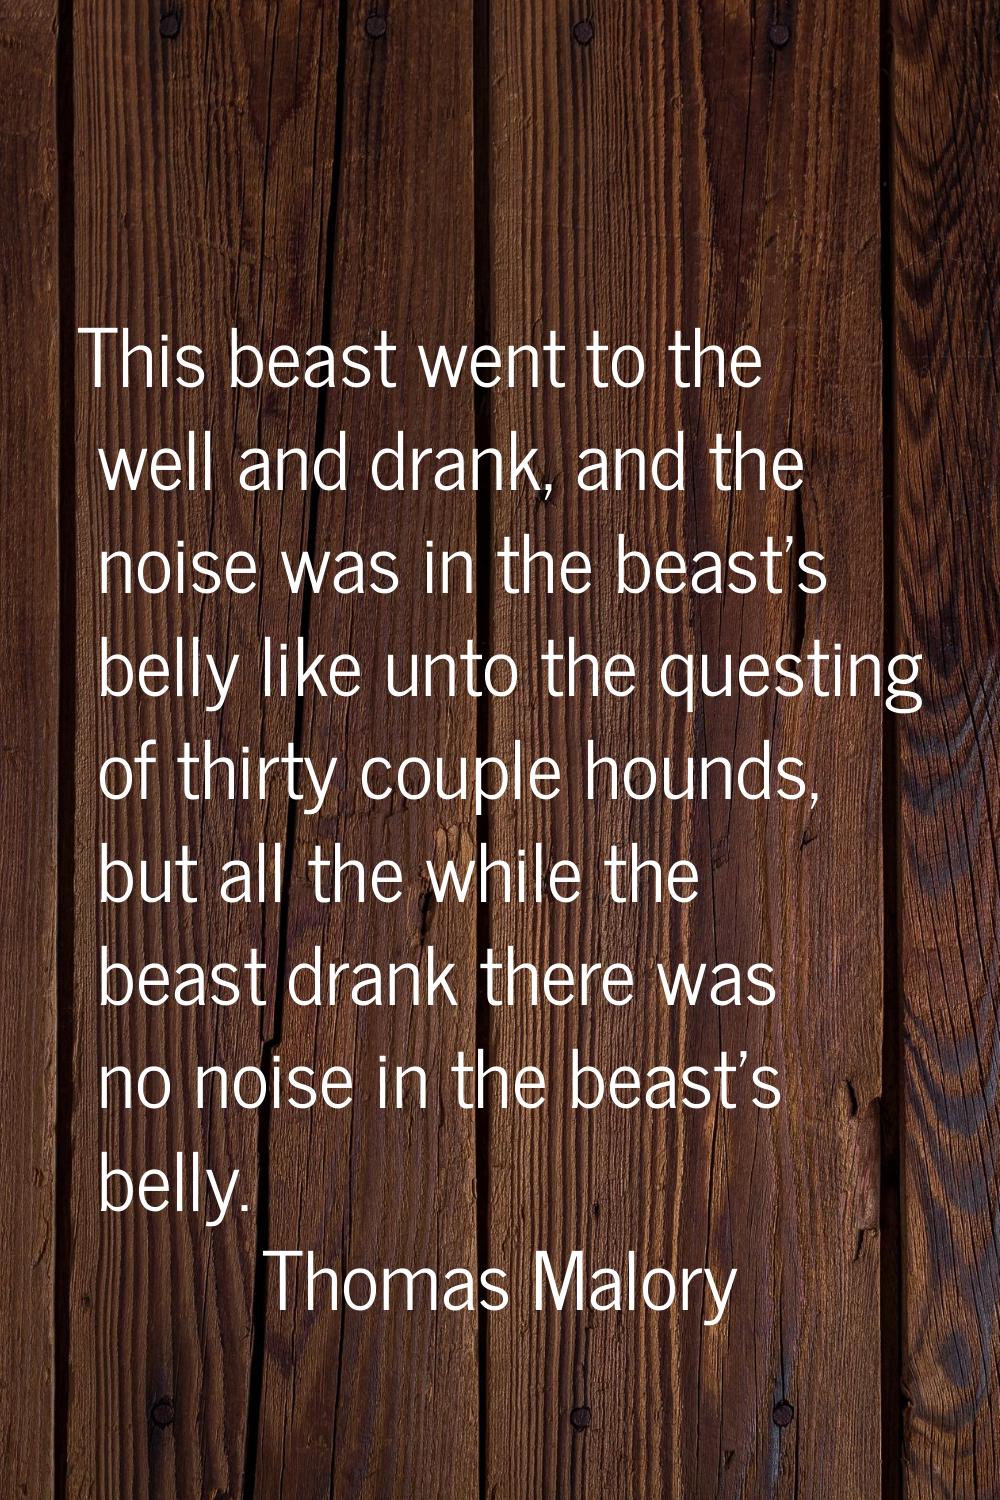 This beast went to the well and drank, and the noise was in the beast's belly like unto the questin